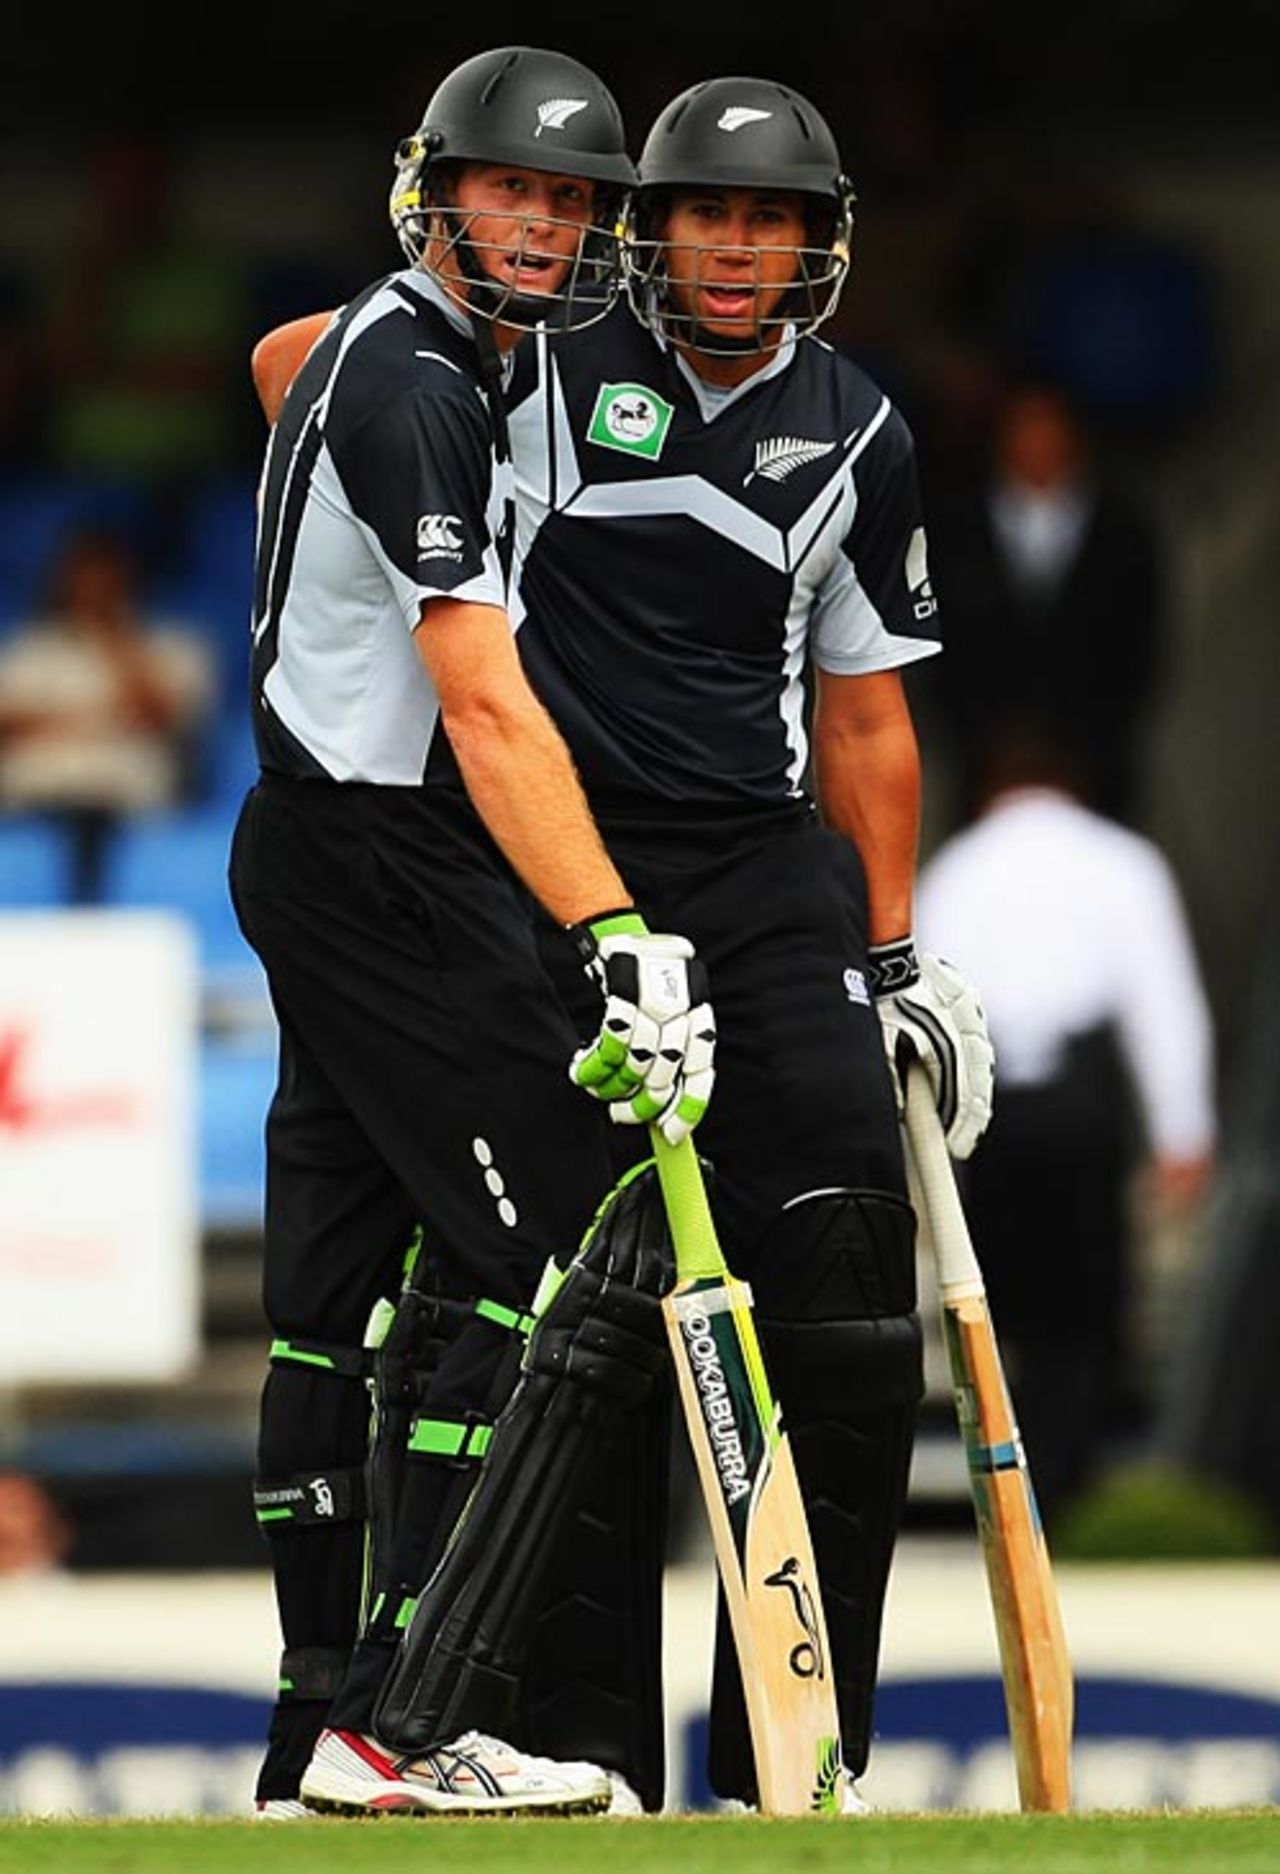 Martin Guptill and Ross Taylor put on 144, New Zealand v West Indies, 4th ODI, Auckland, January 10, 2009